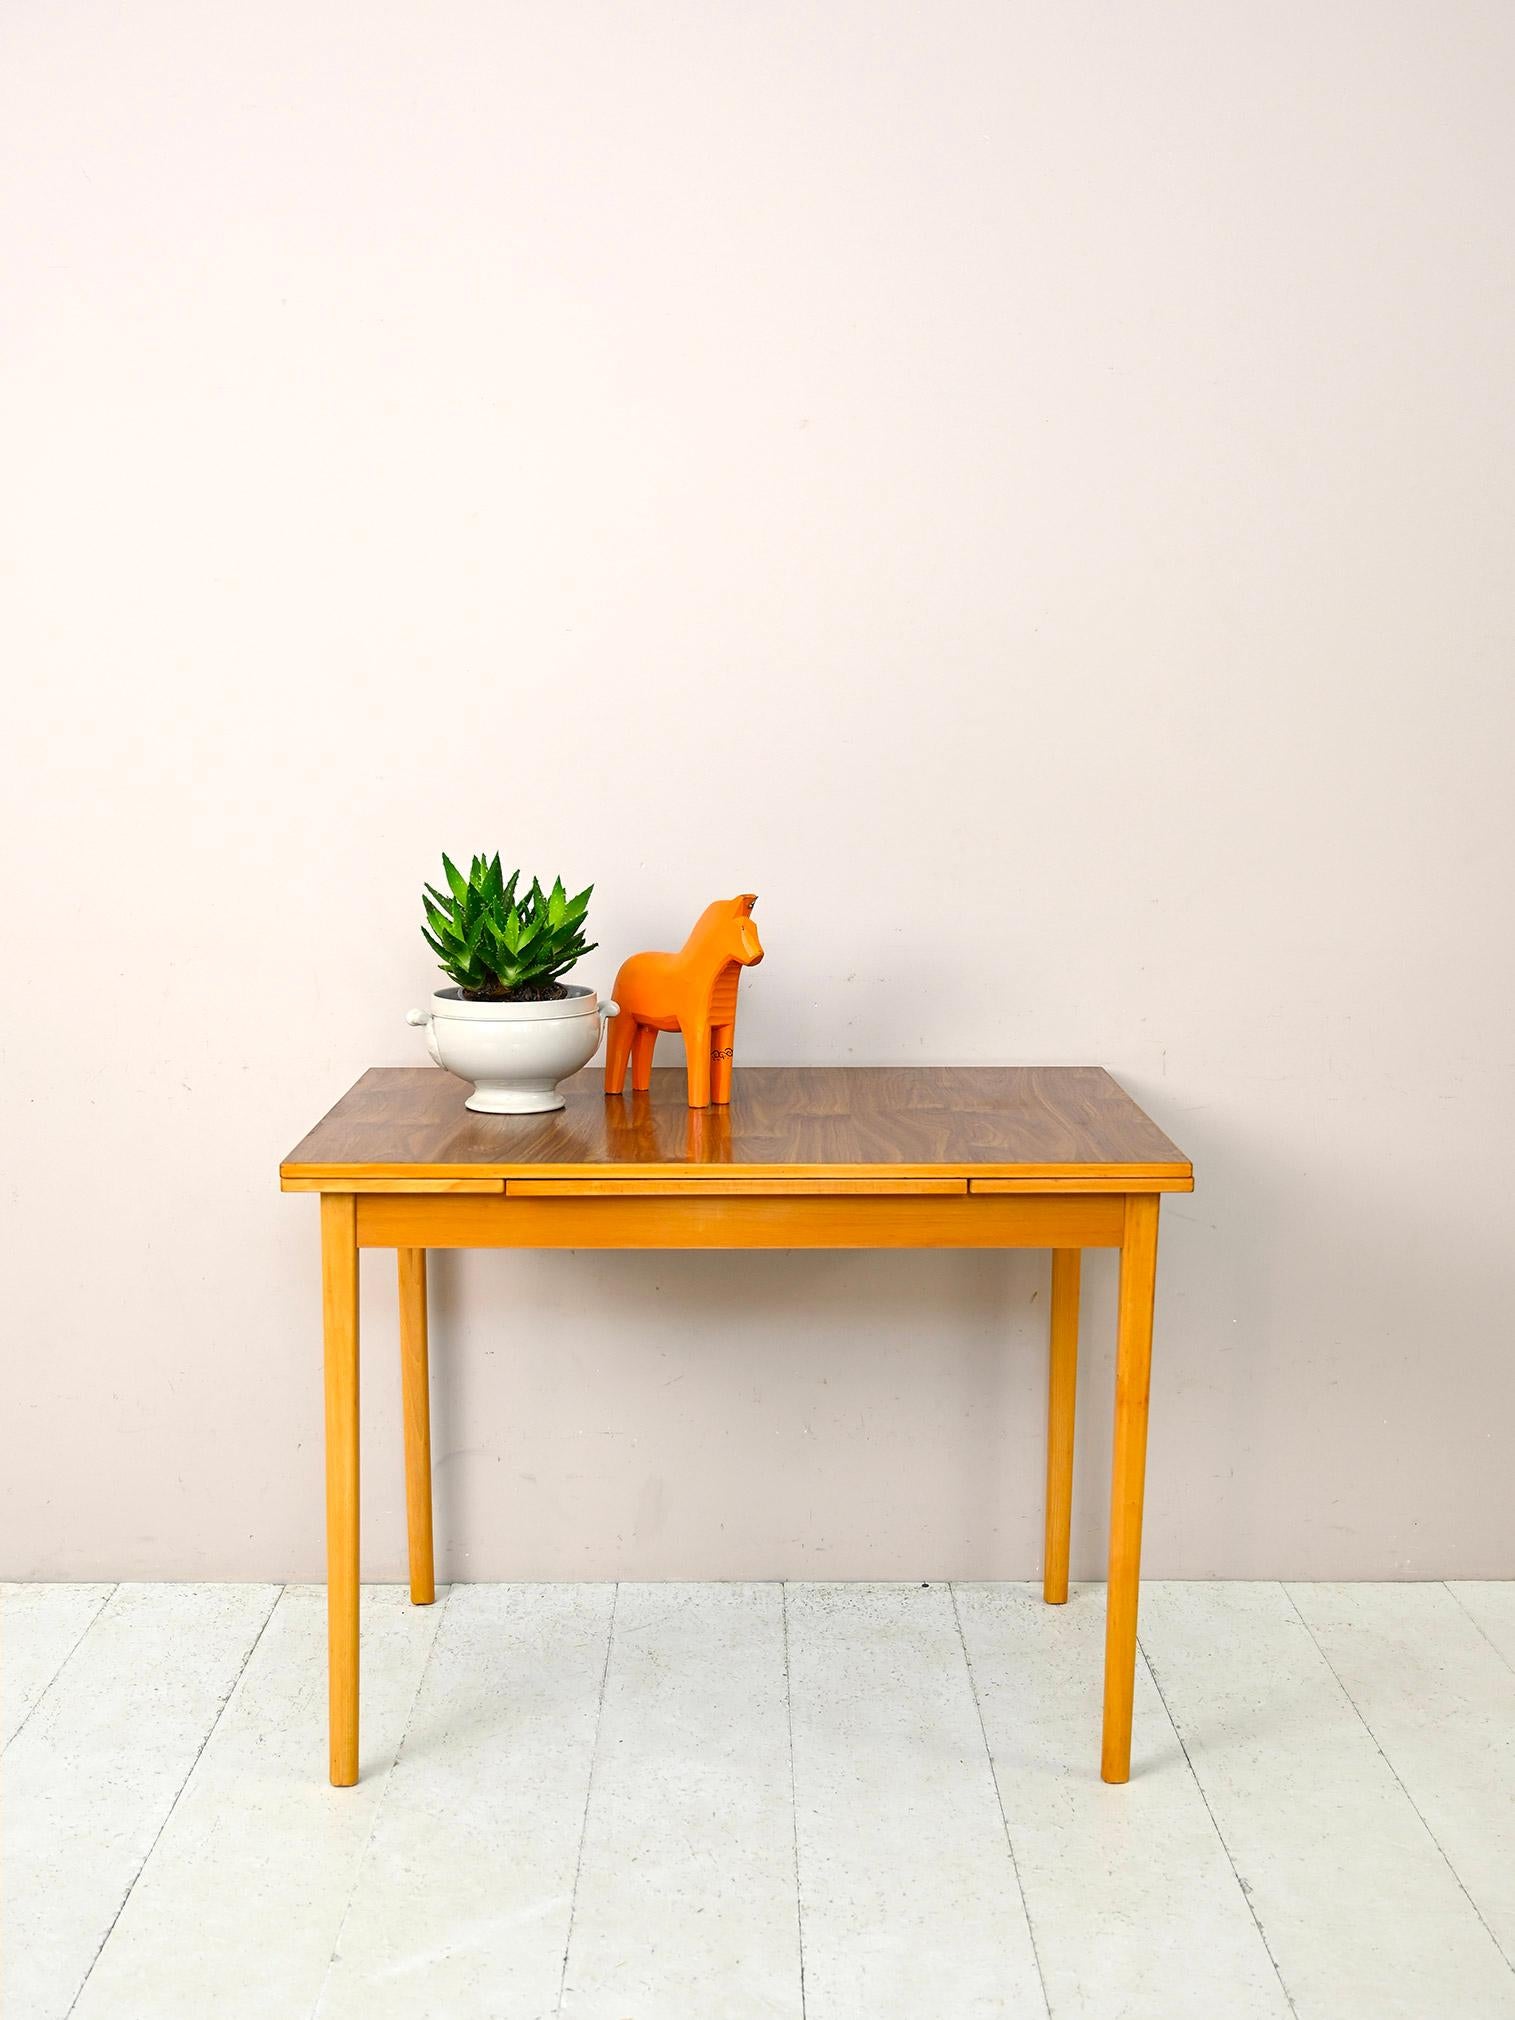 Scandinavian 1960s vintage extendable table.

This typical mid-century piece of furniture is distinguished by its faux-wood formica top that makes it very durable without sacrificing style.
Thanks to the presence of the side planks, it can be